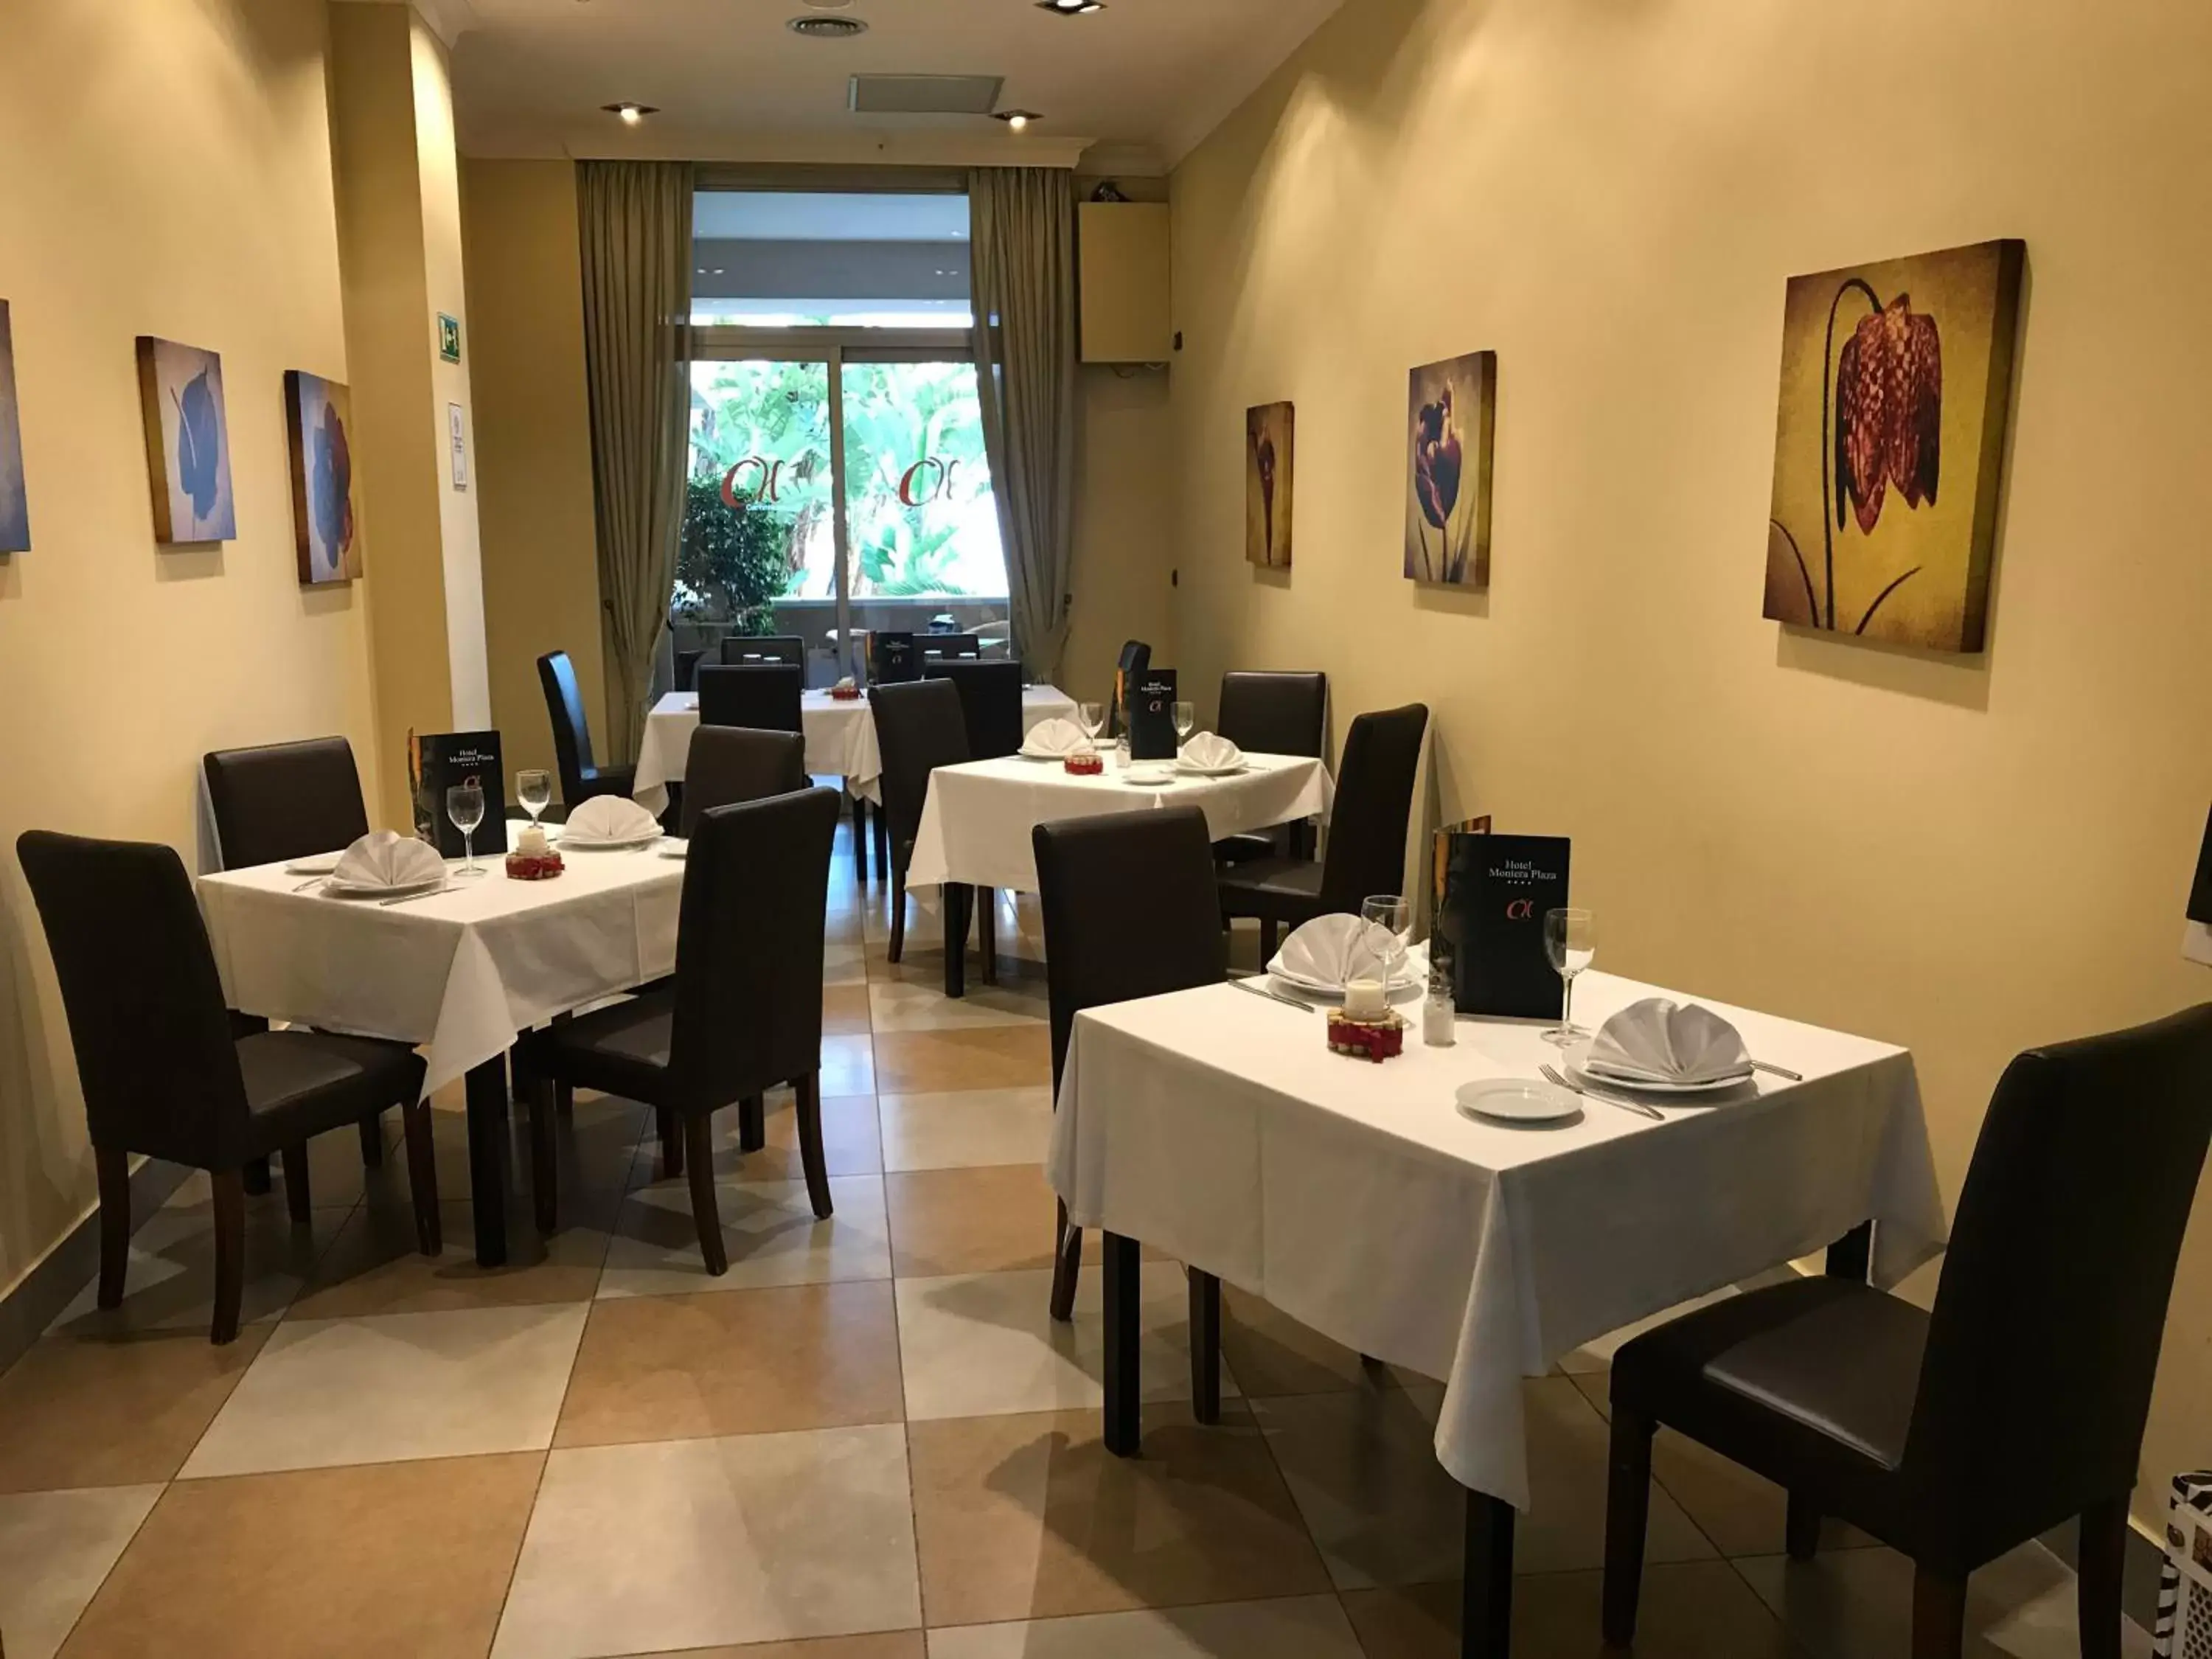 Restaurant/Places to Eat in Hotel Montera Plaza